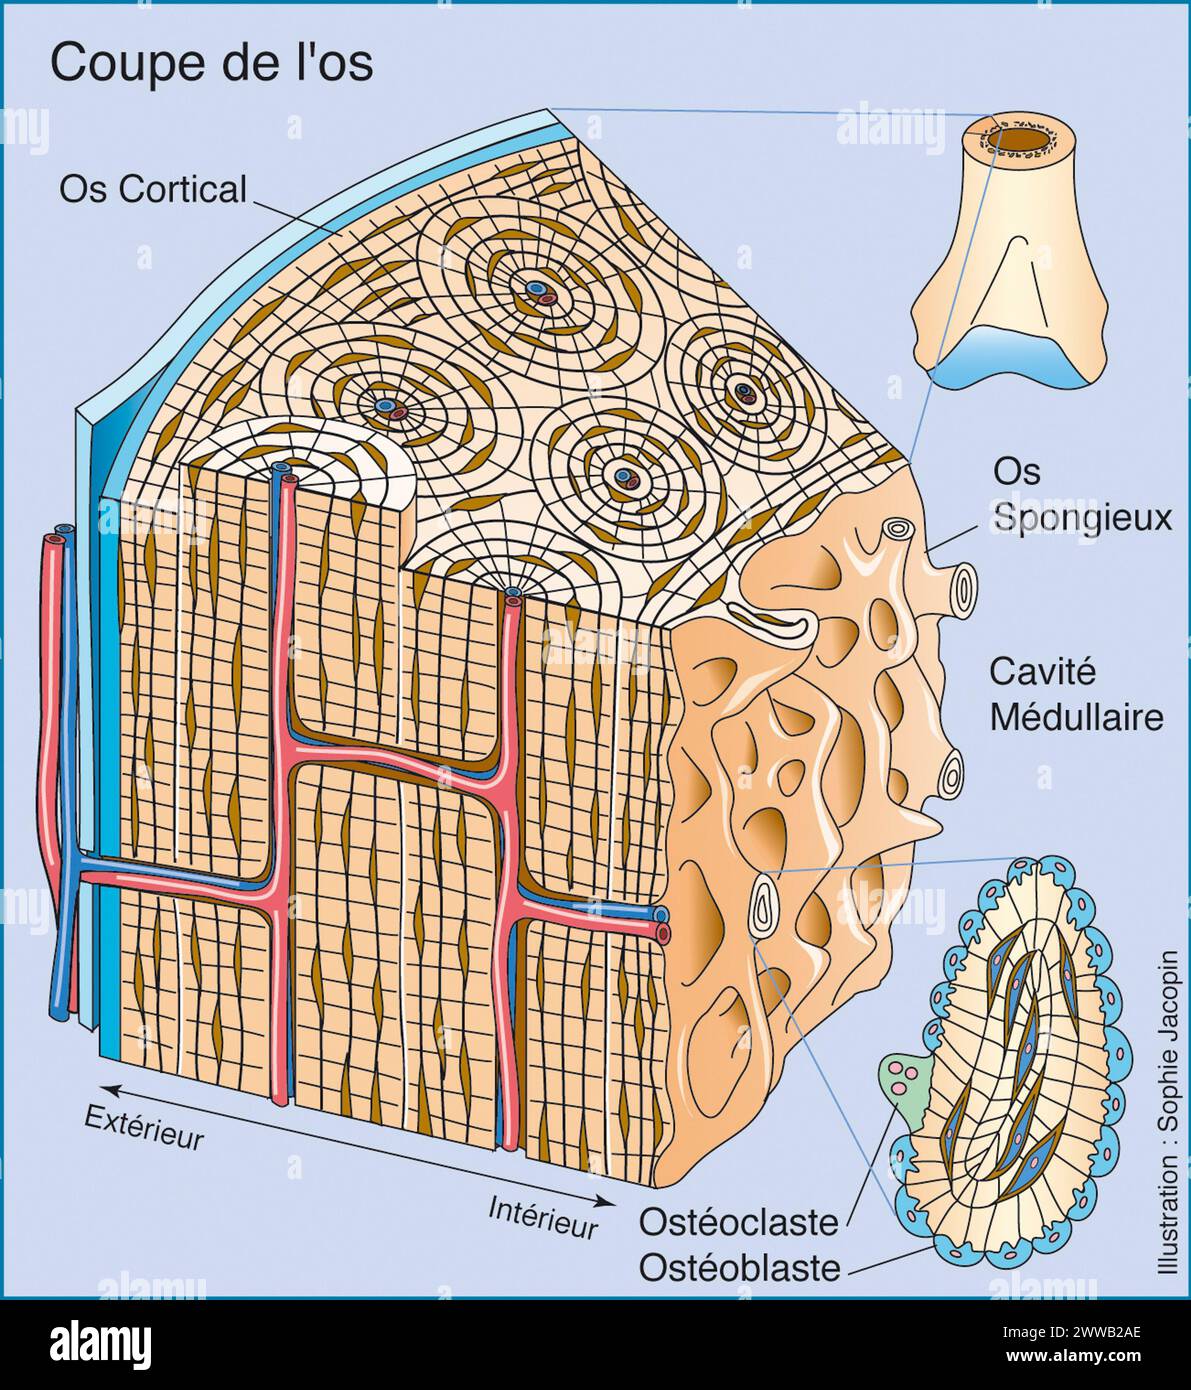 Bone cut. Representation in 3/4 view of the structure of the bone with zoom showing the different cells that make up the bone tissue. Stock Photo